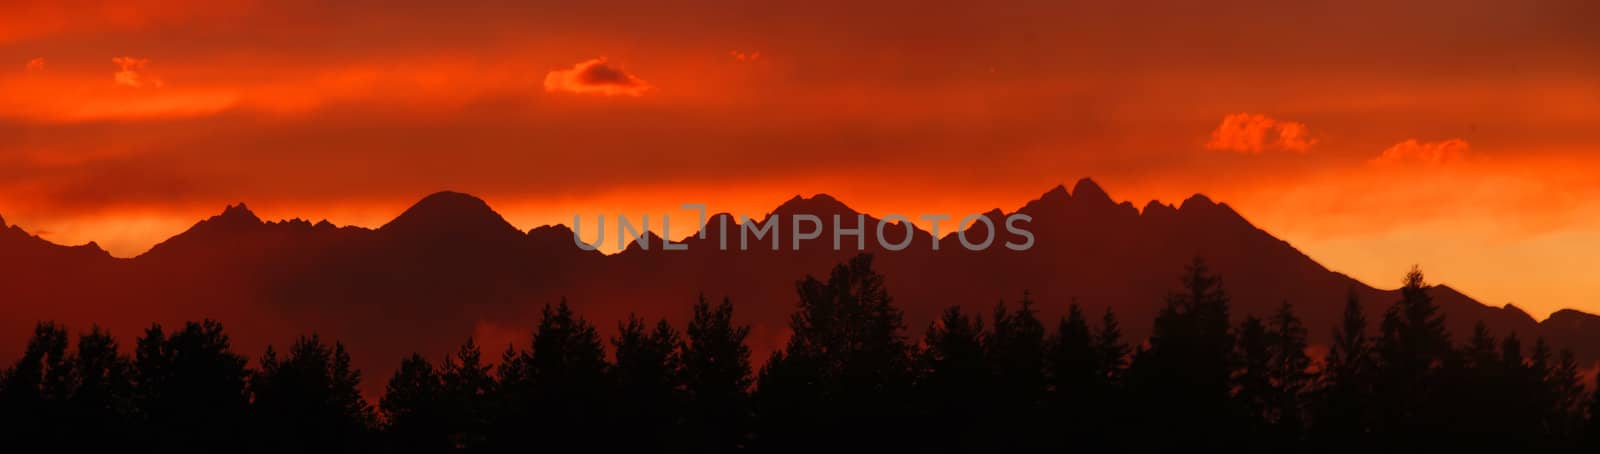 Panoramic photo of Tatras mountains in Slovakia after the storm in the evening at dusk